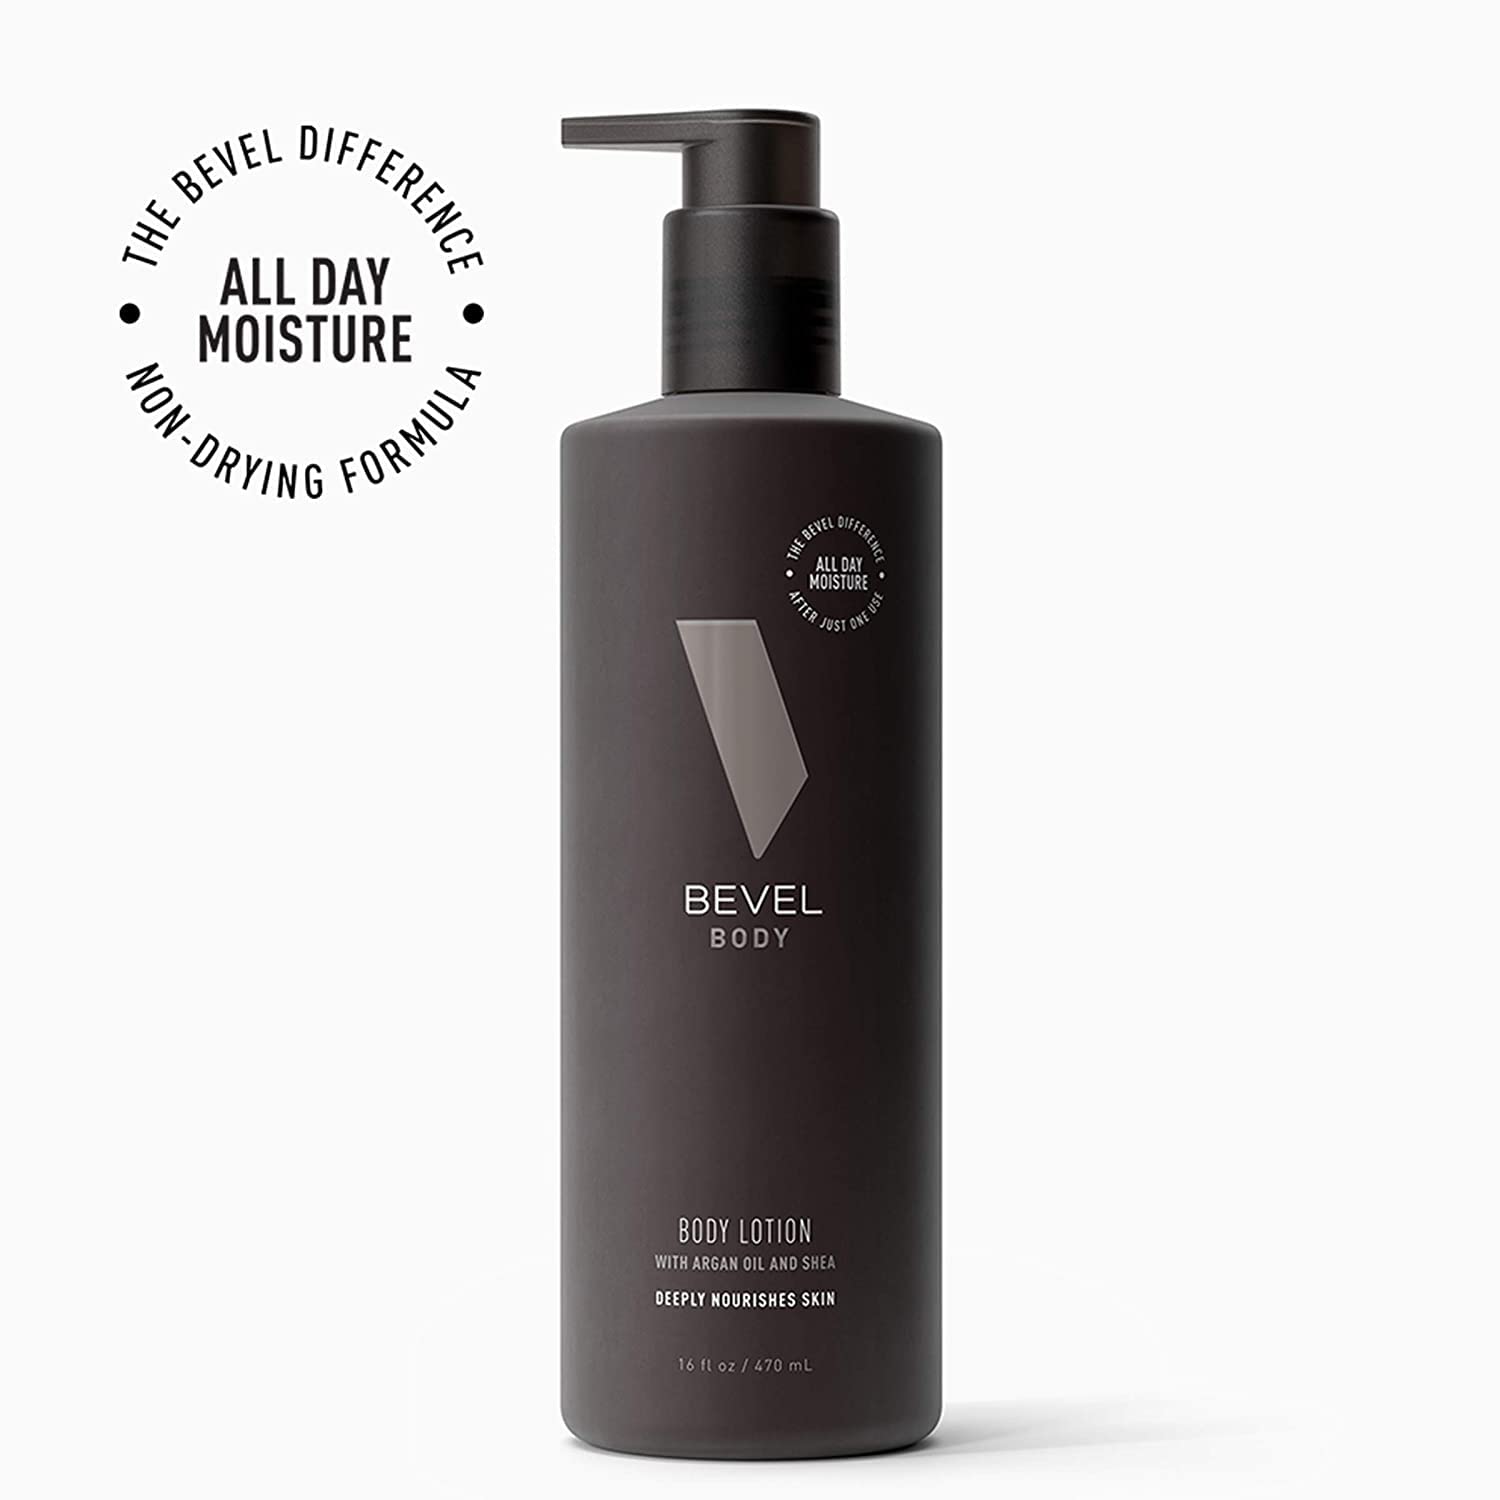 Bevel All Day Body Lotion for Men with Shea Butter and Argan Oil, Lightweight Formula Softens and Smoothes Skin, 16 Oz